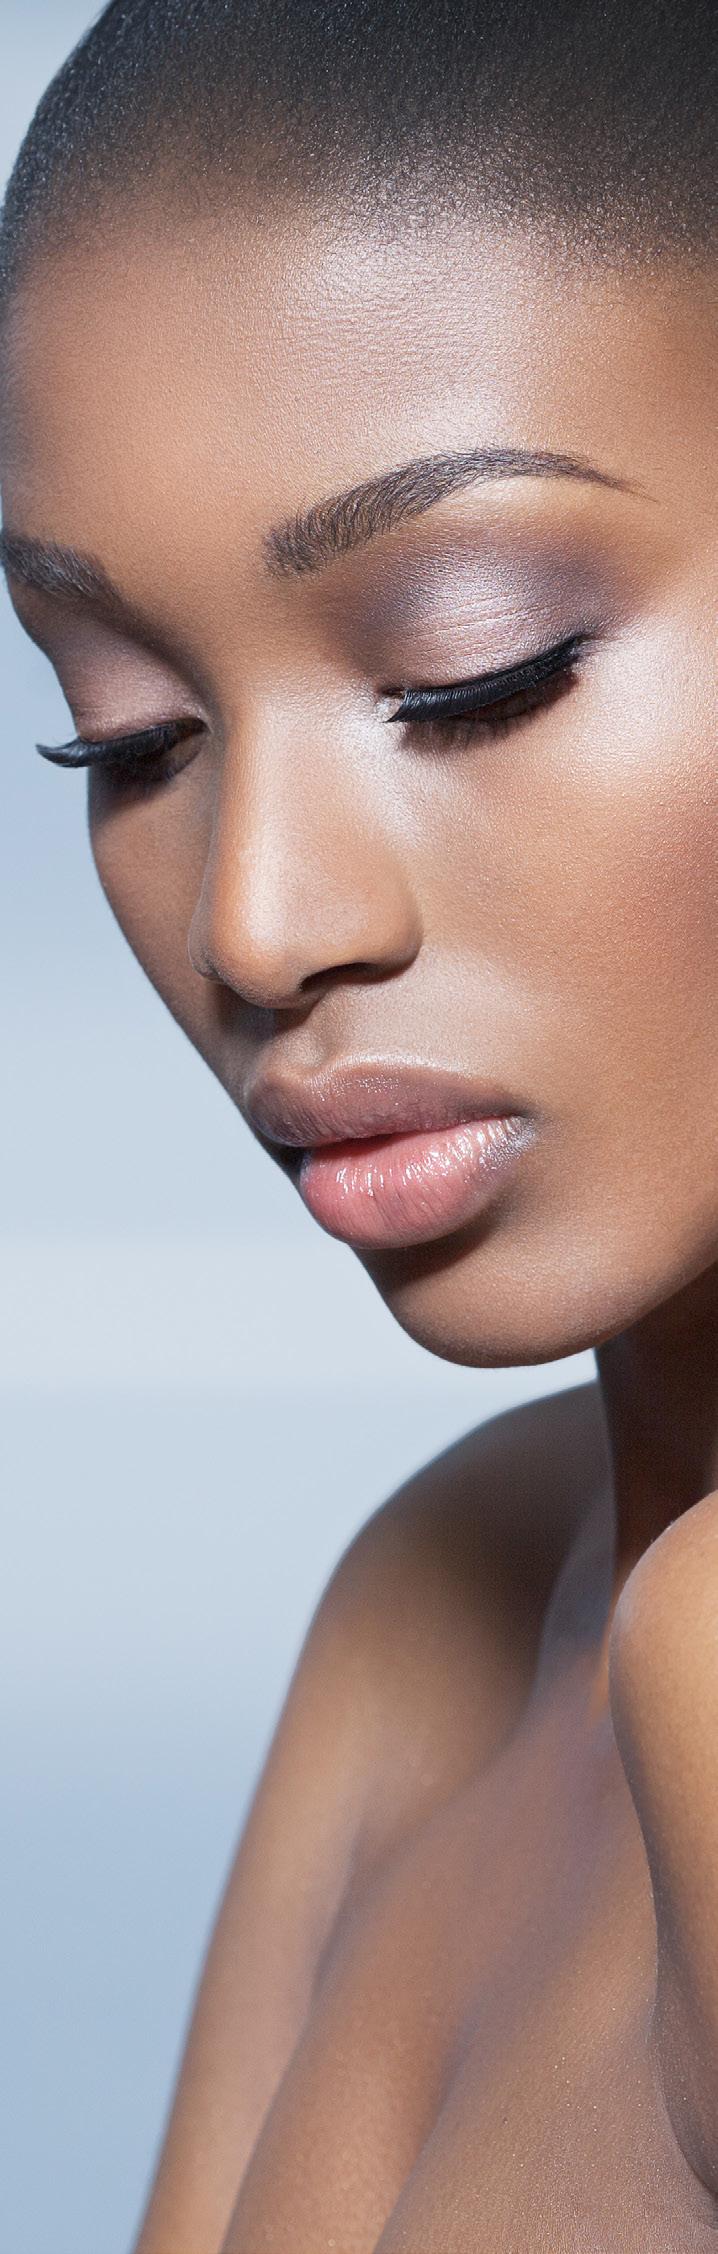 The skin is given a youthful glow with gradually fading sun and age spots.